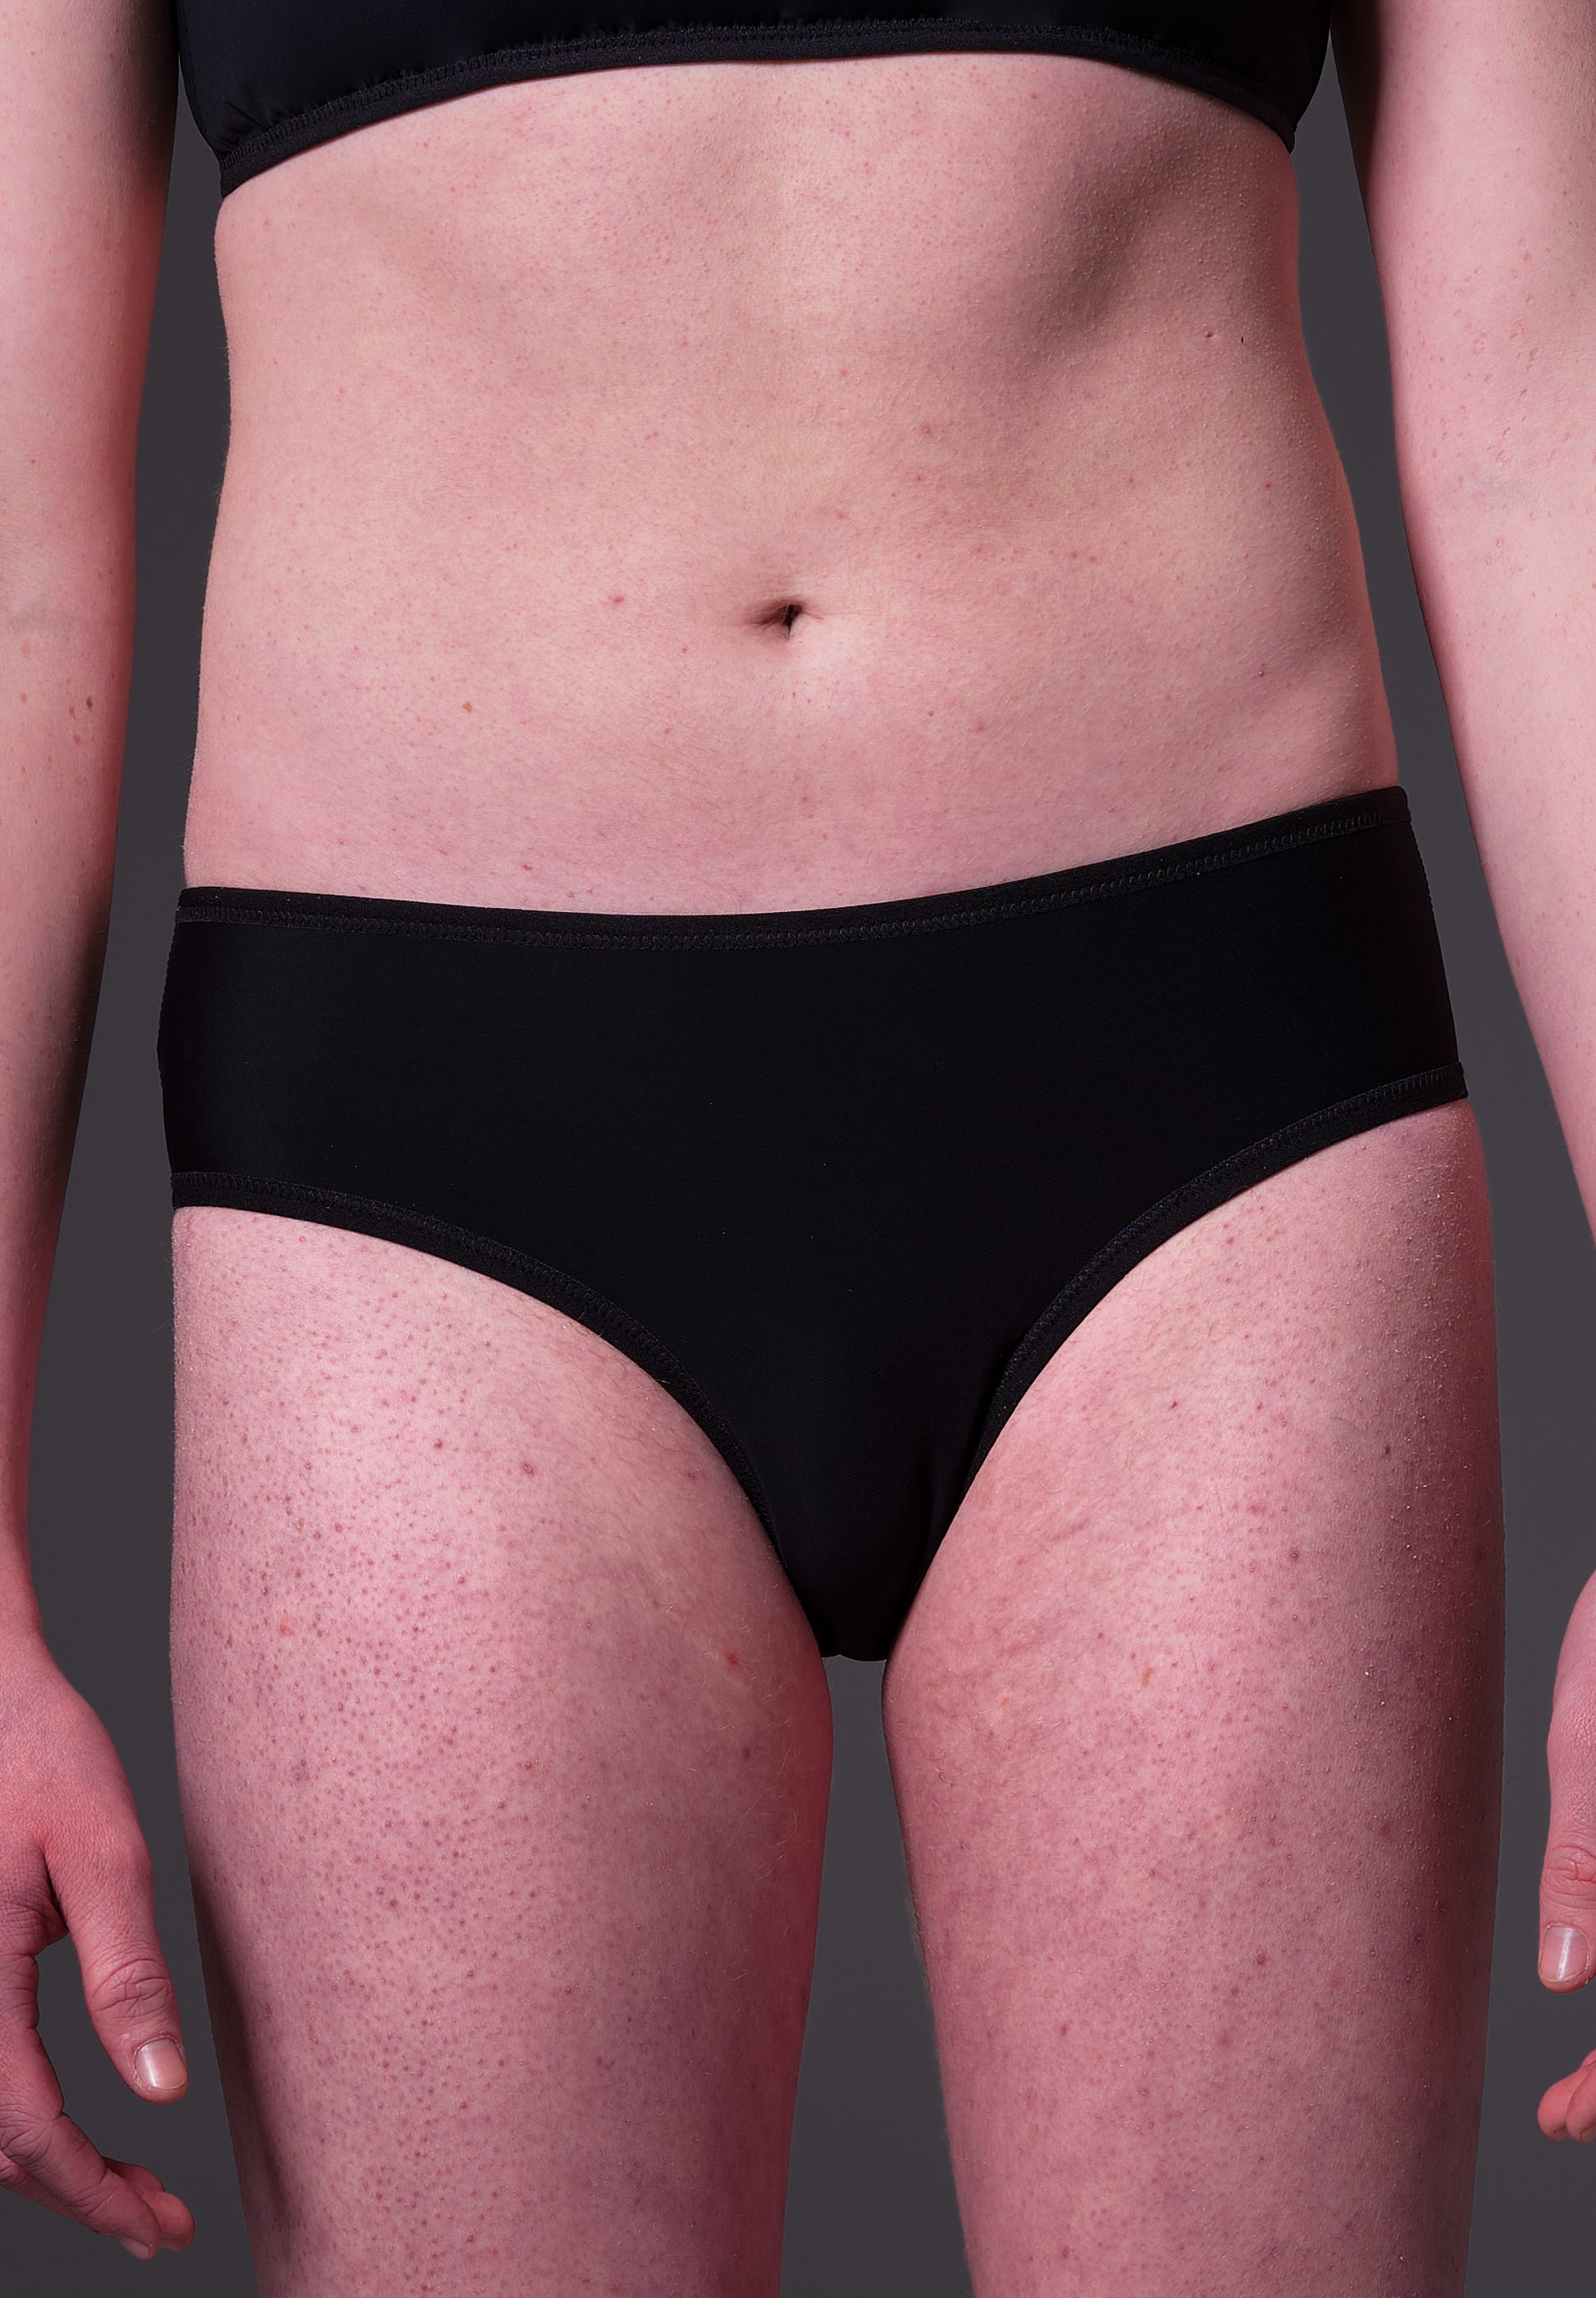 Best Underwear for Trans Women Who Don't Want to Tuck